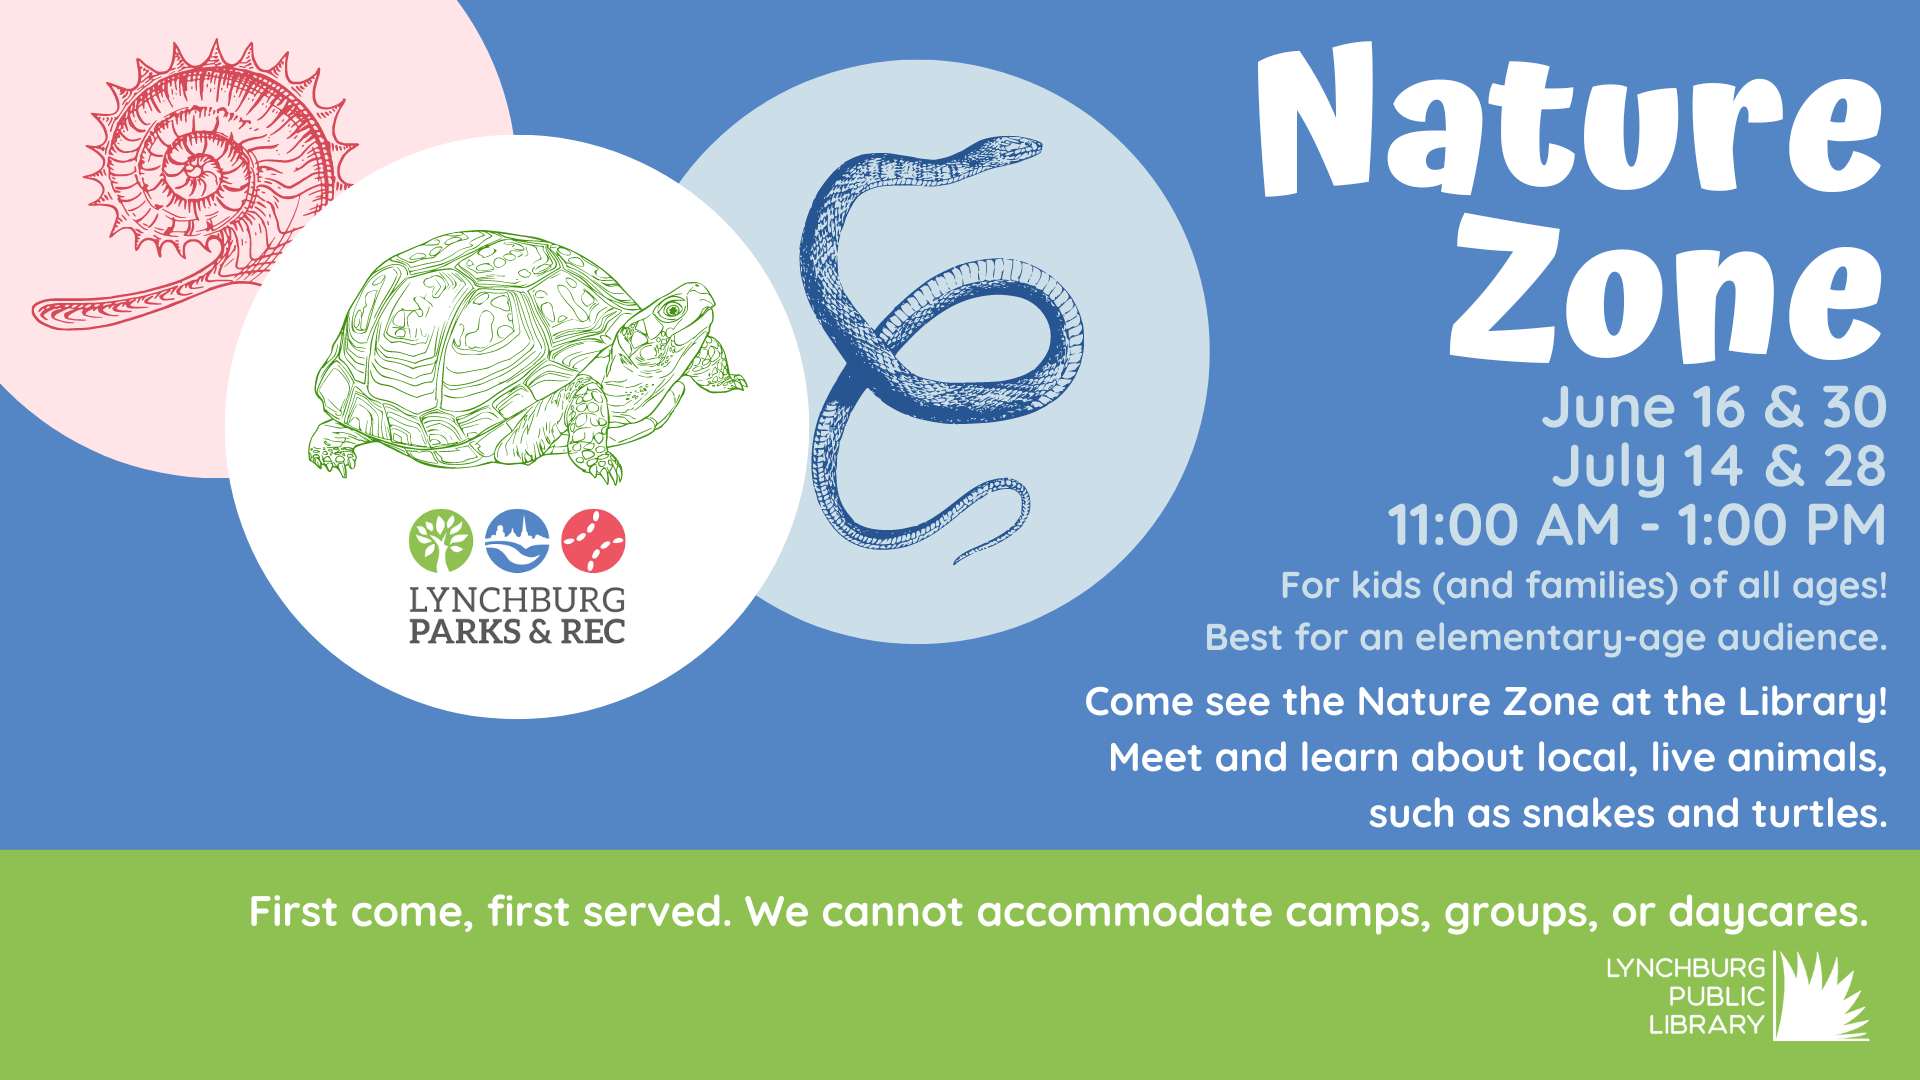 Come see the Nature Zone at the Library. June 16 June 30 July 14 July 28 from 11 AM to 1 PM in the Youth Activity Room. For kids and families of all ages. Best for an elementary age audience. Meet and learn about local live animals such as snakes and turtles.